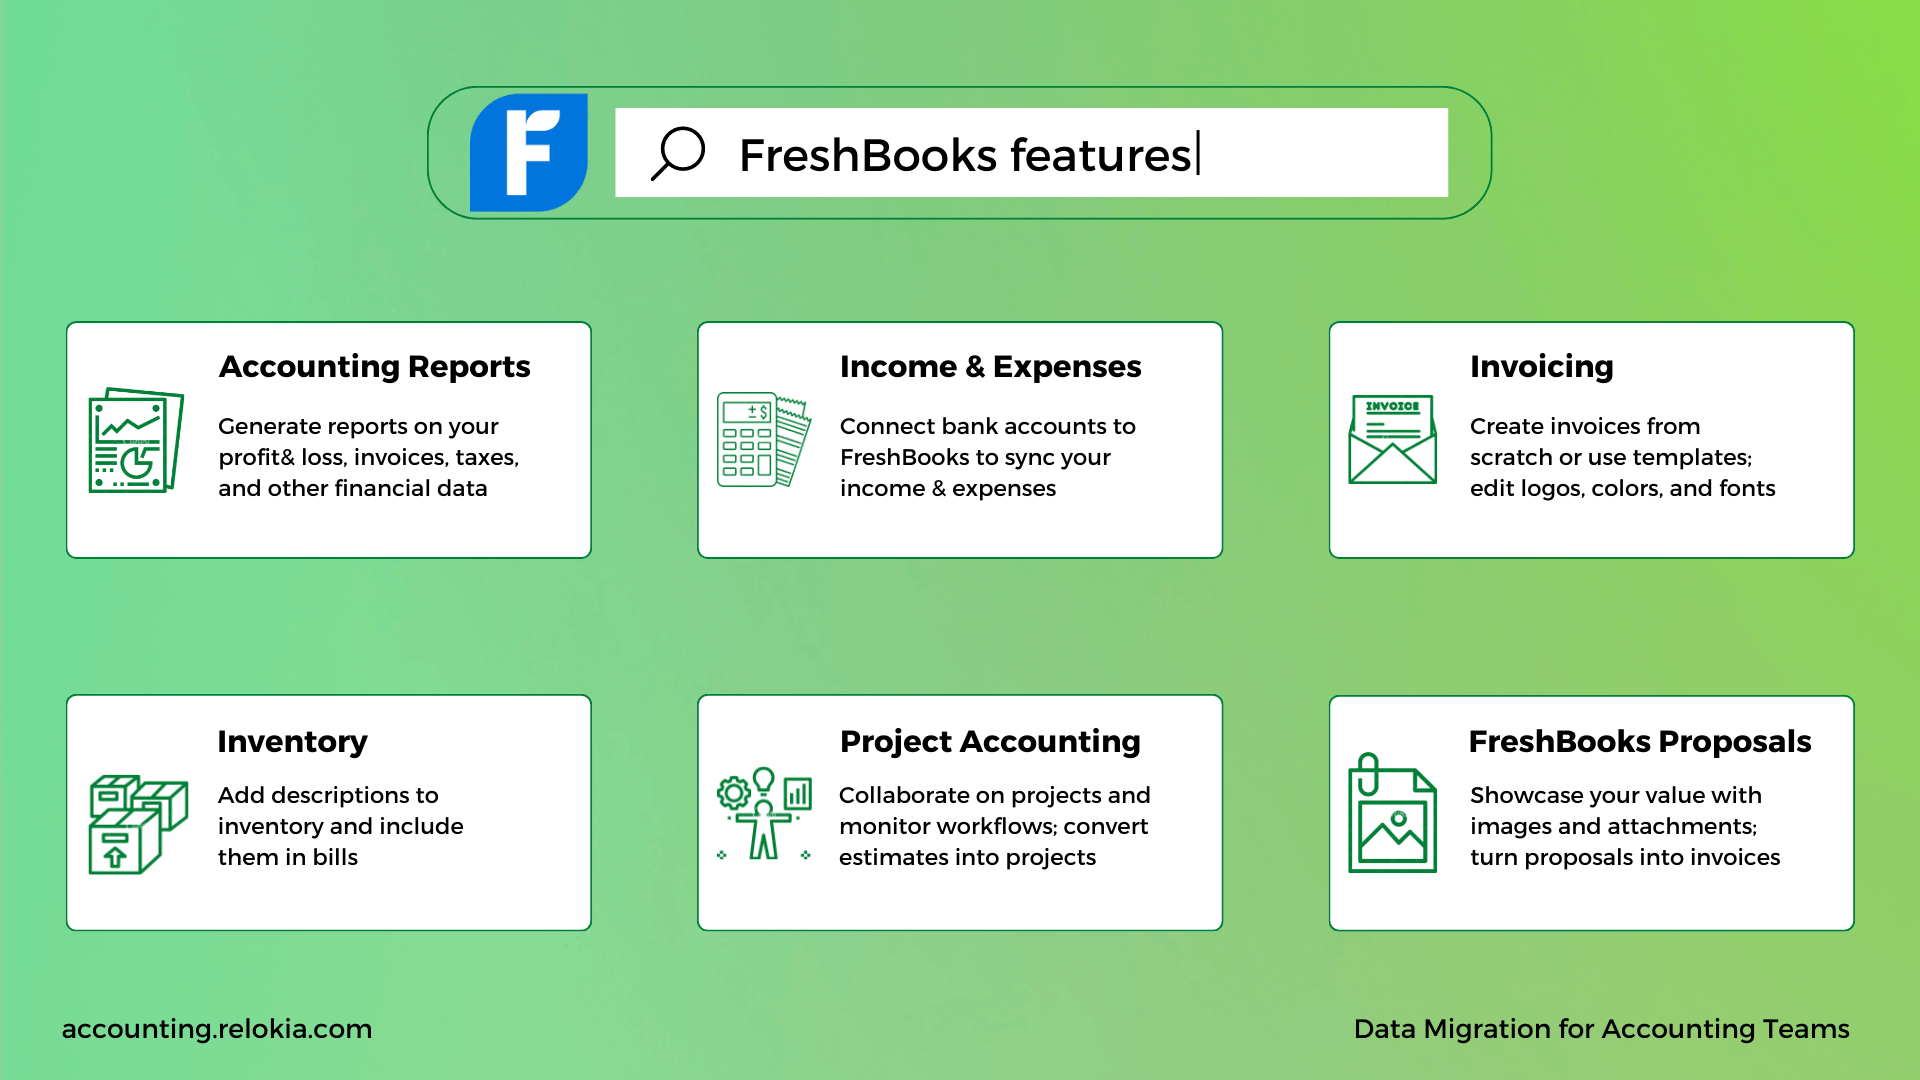 FreshBooks Functions